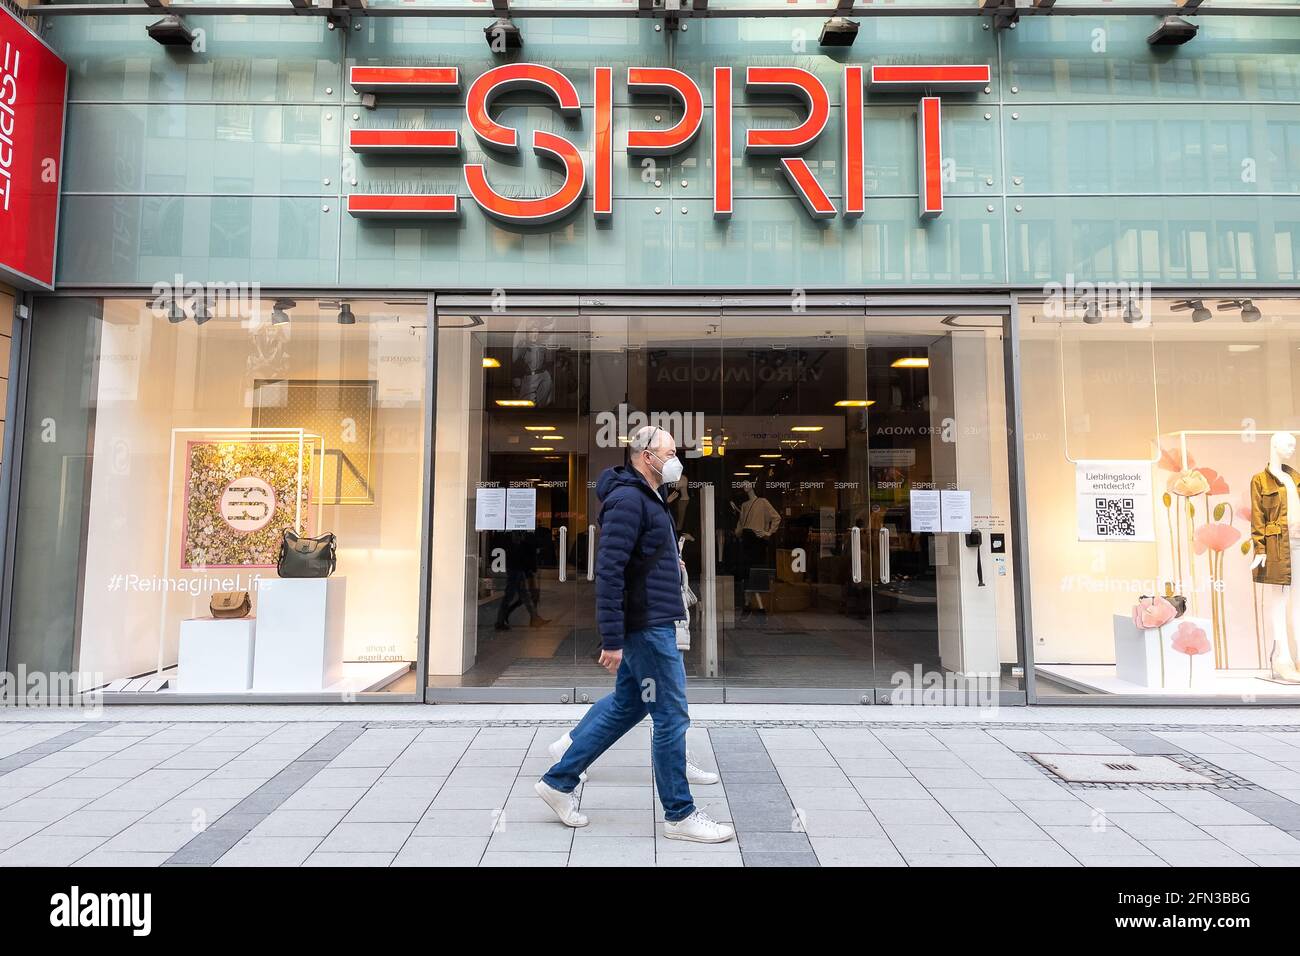 Esprit Label High Resolution Stock Photography and Images - Alamy